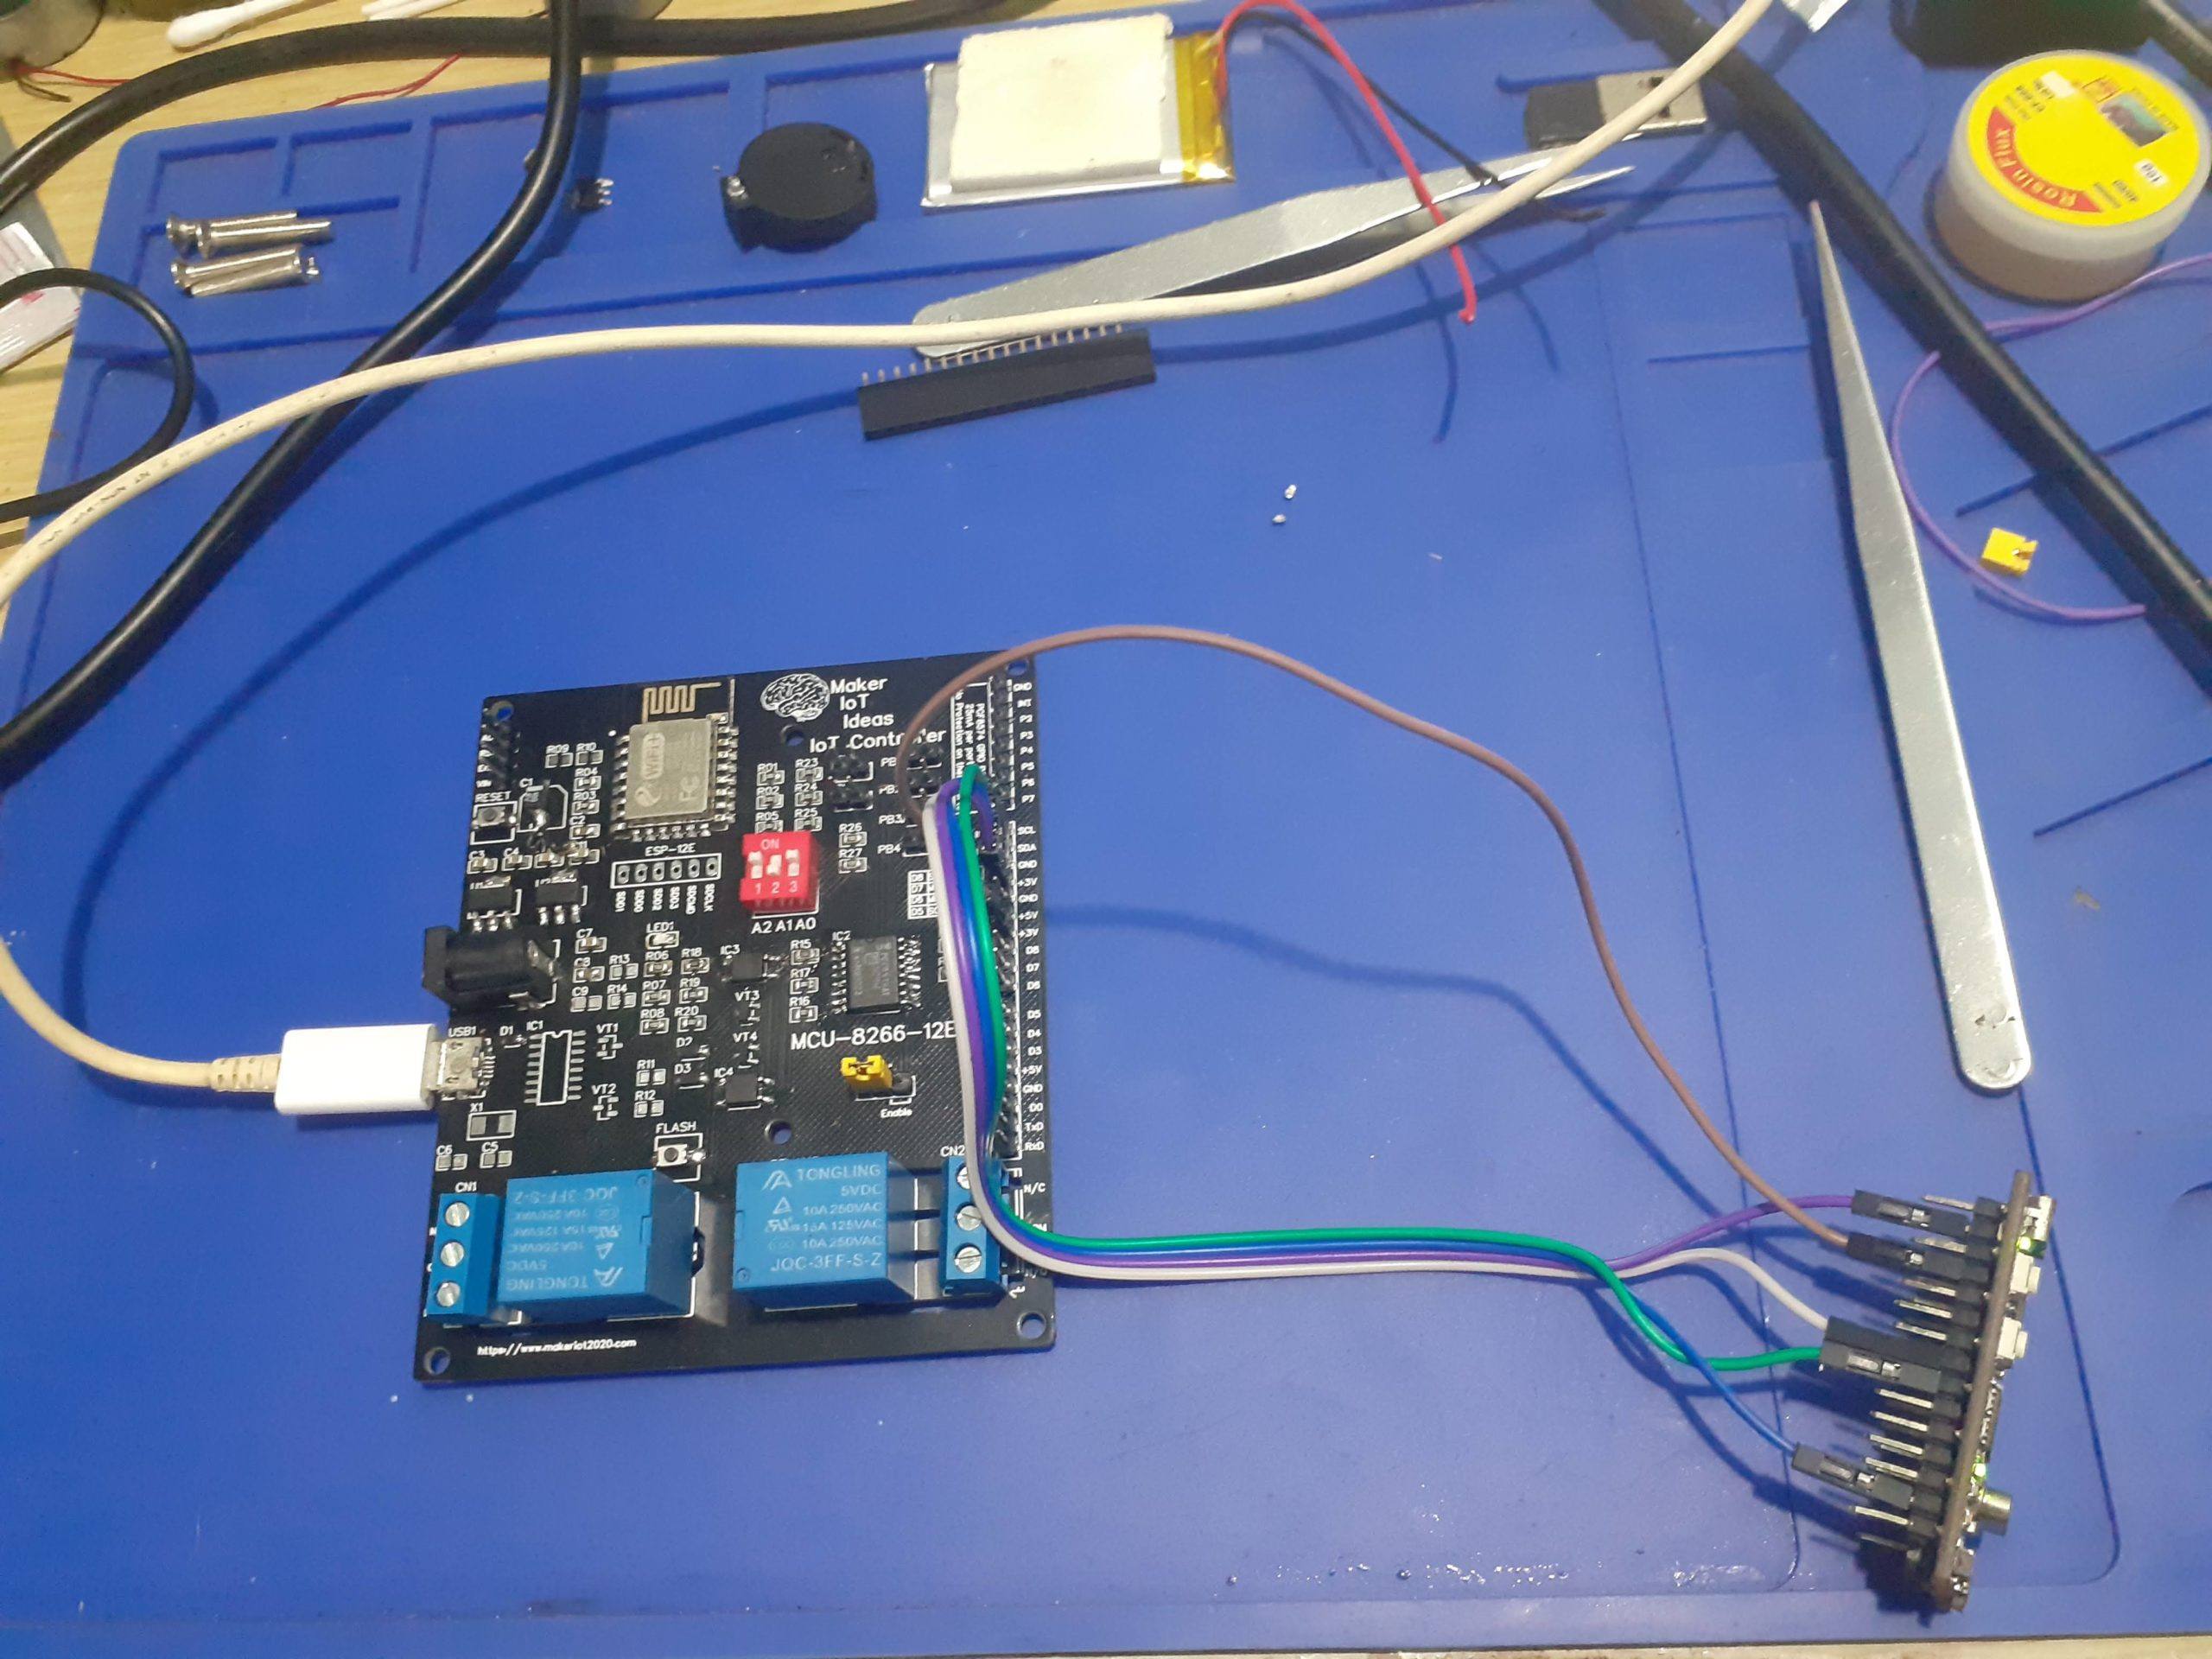 Taking the next step with the IoT Controller.